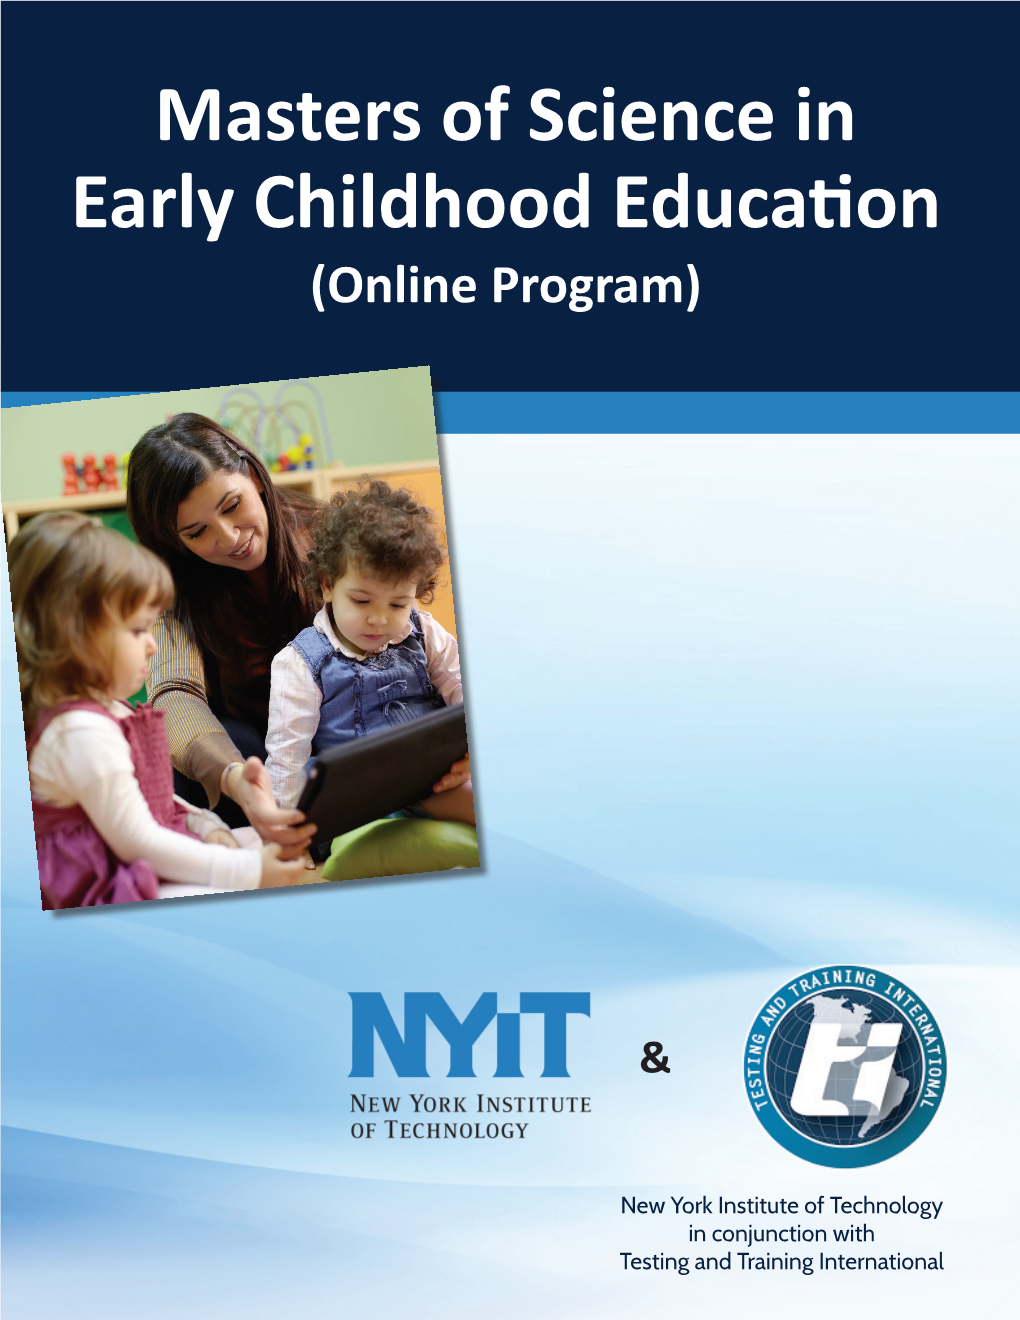 Masters of Science in Early Childhood Education (Online Program)